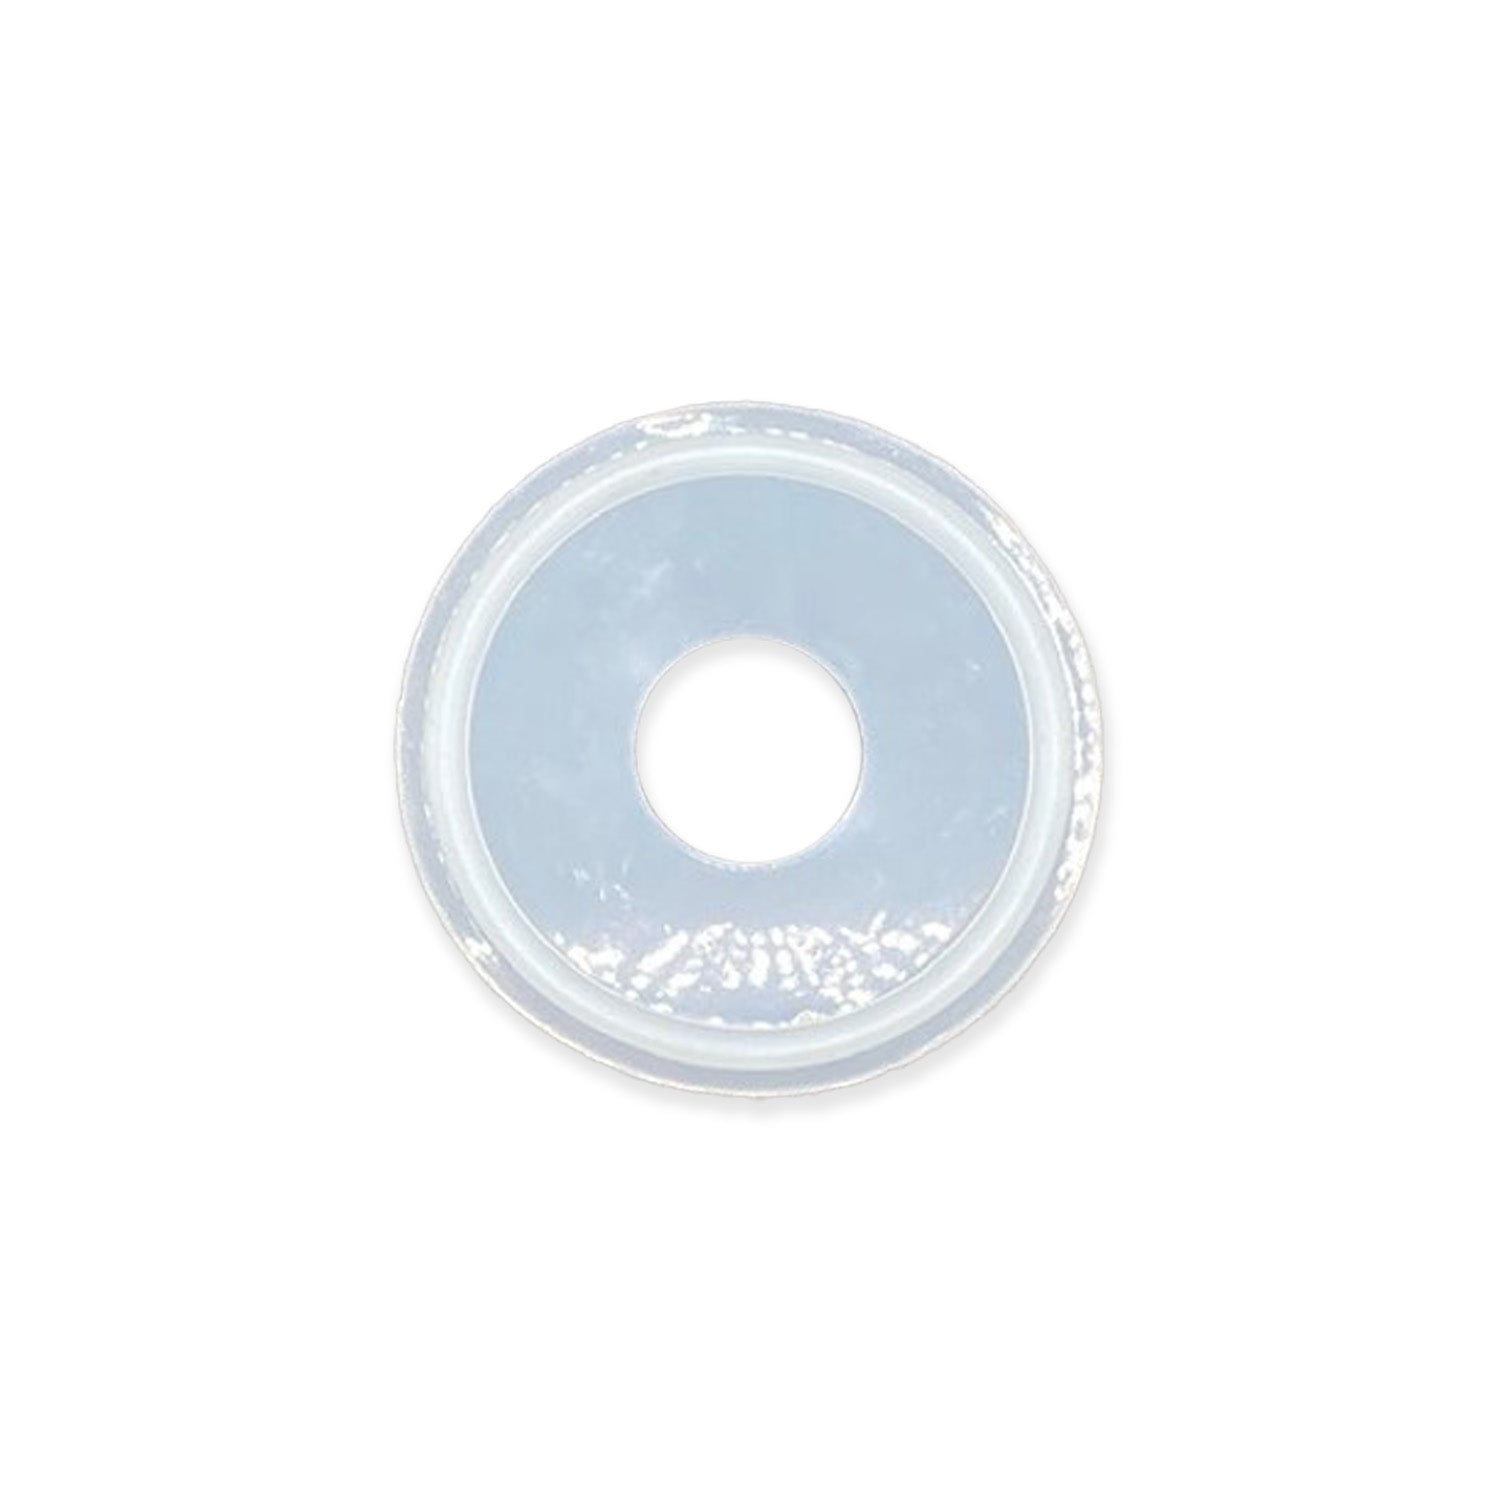 3/4" Tri-Clamp Gasket, Silicone, clear